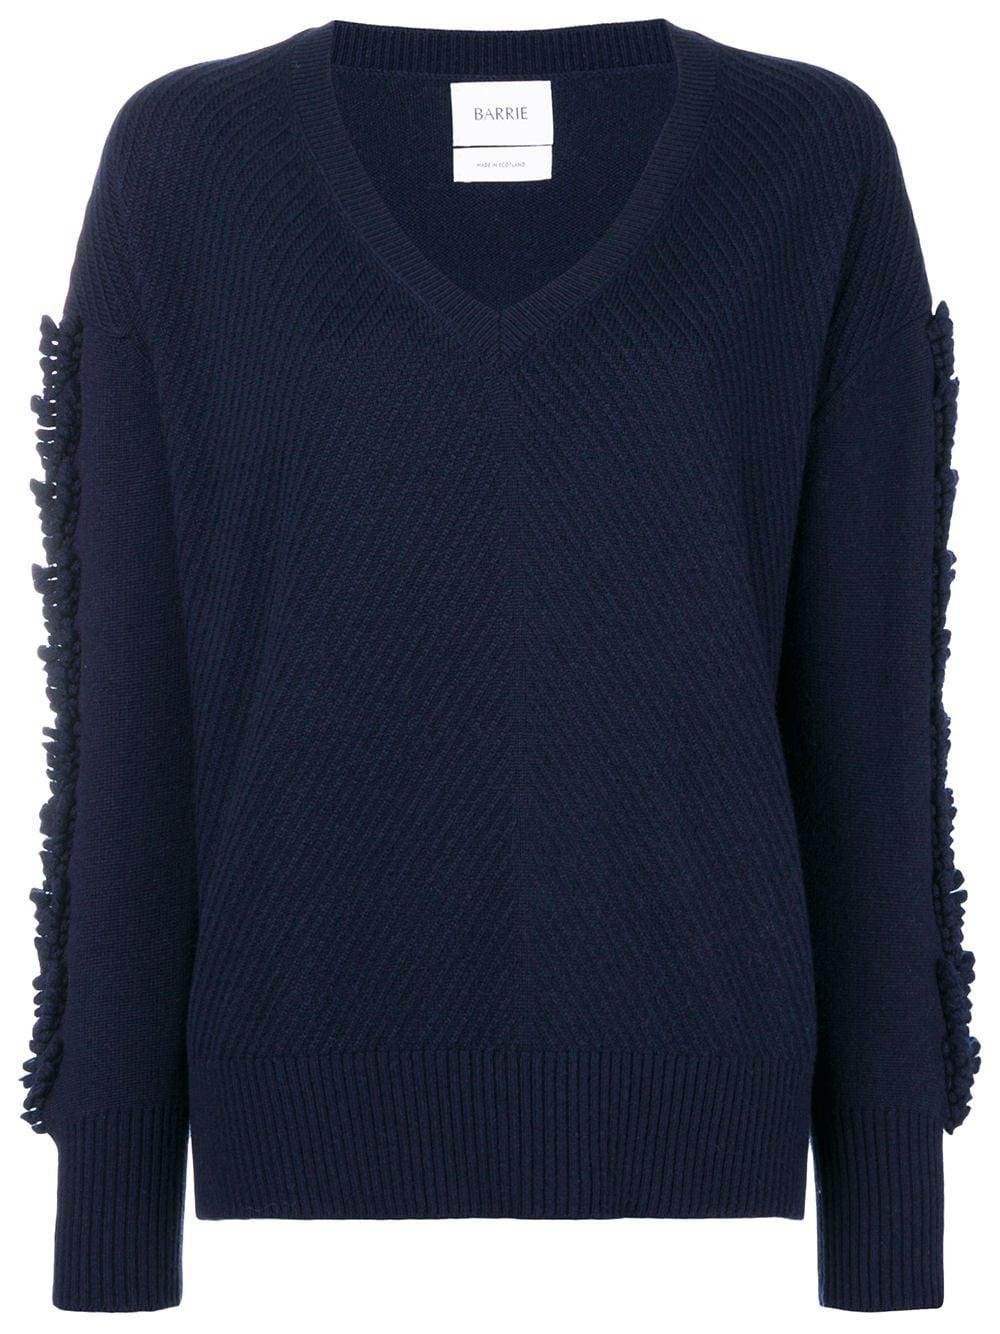 Troisieme Dimension cashmere V-neck pullover by BARRIE